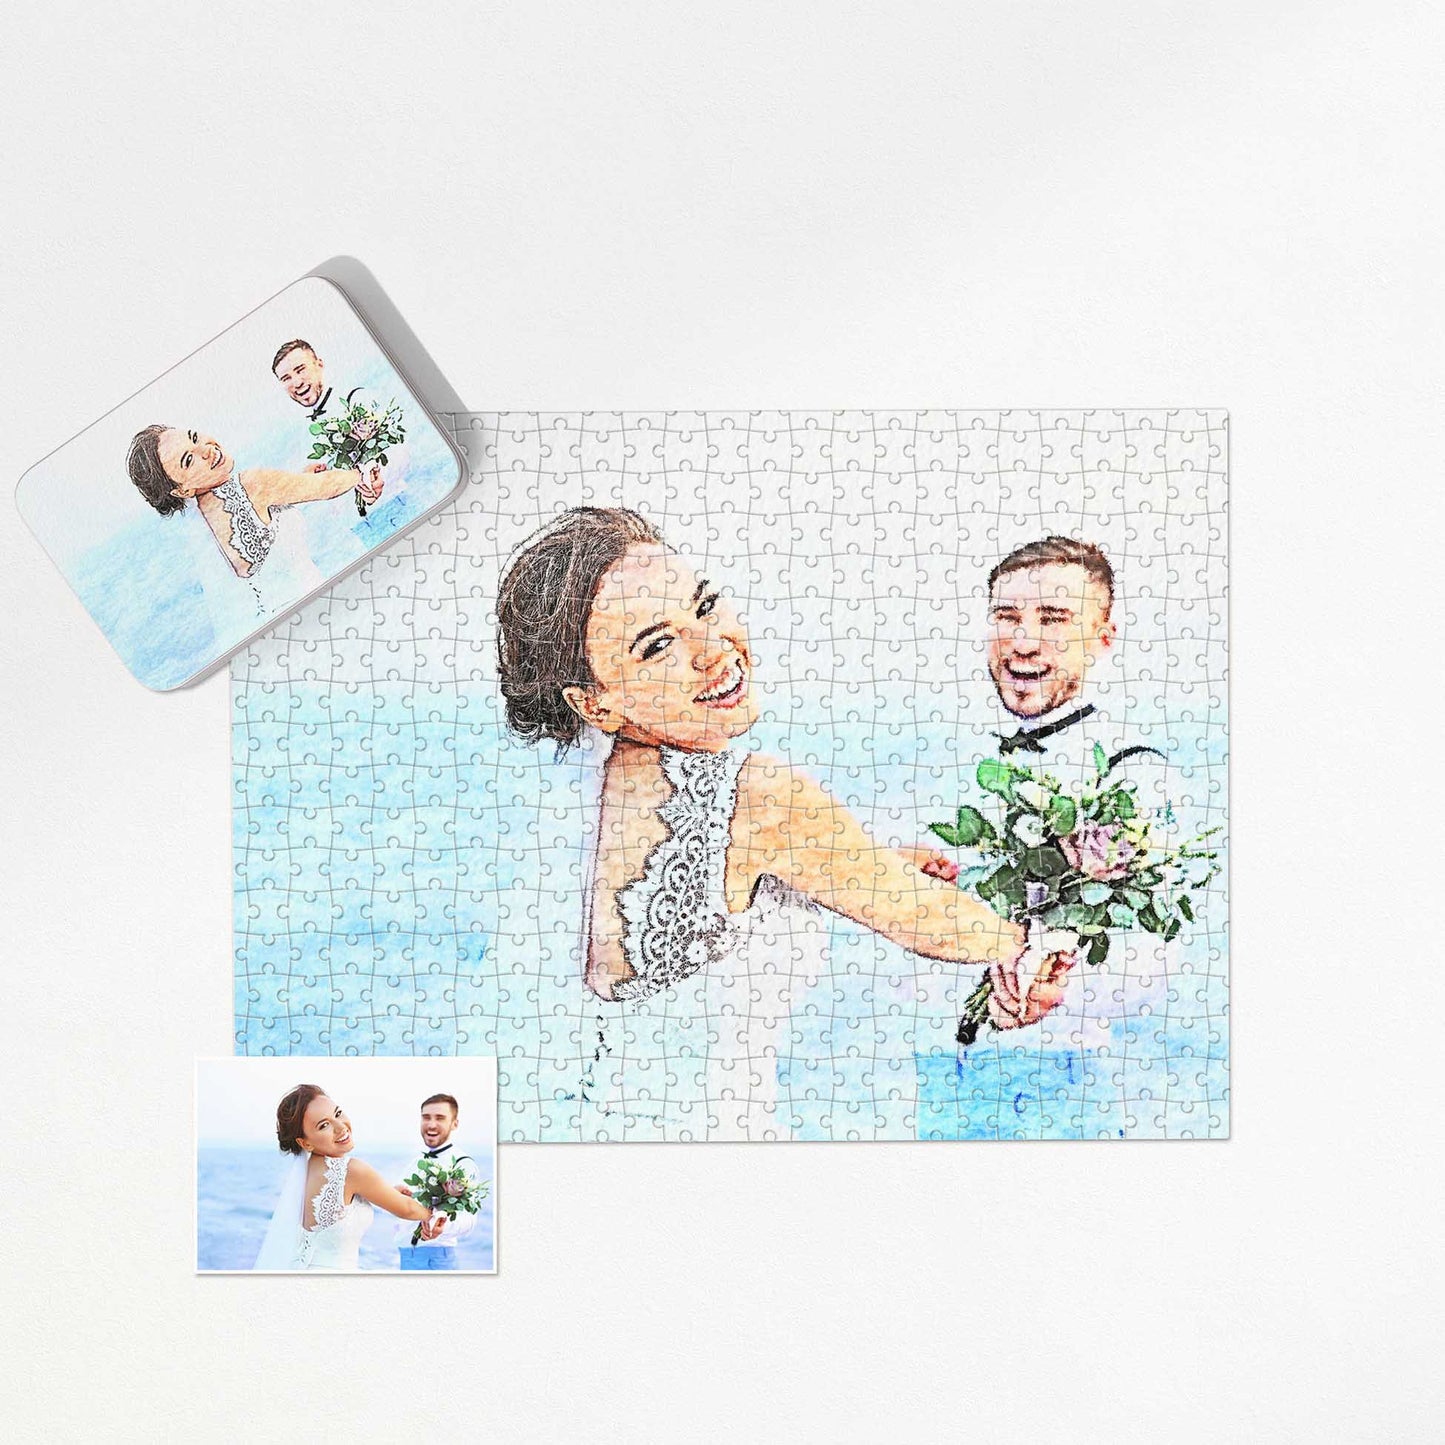 Transform photos into art with a Personalised Watercolor Jigsaw Puzzle painting. Enjoy the lively watercolour effect, vibrant colours, and handmade charm on wooden or cardboard pieces. This dye sublimation print evokes joy, delightful gift